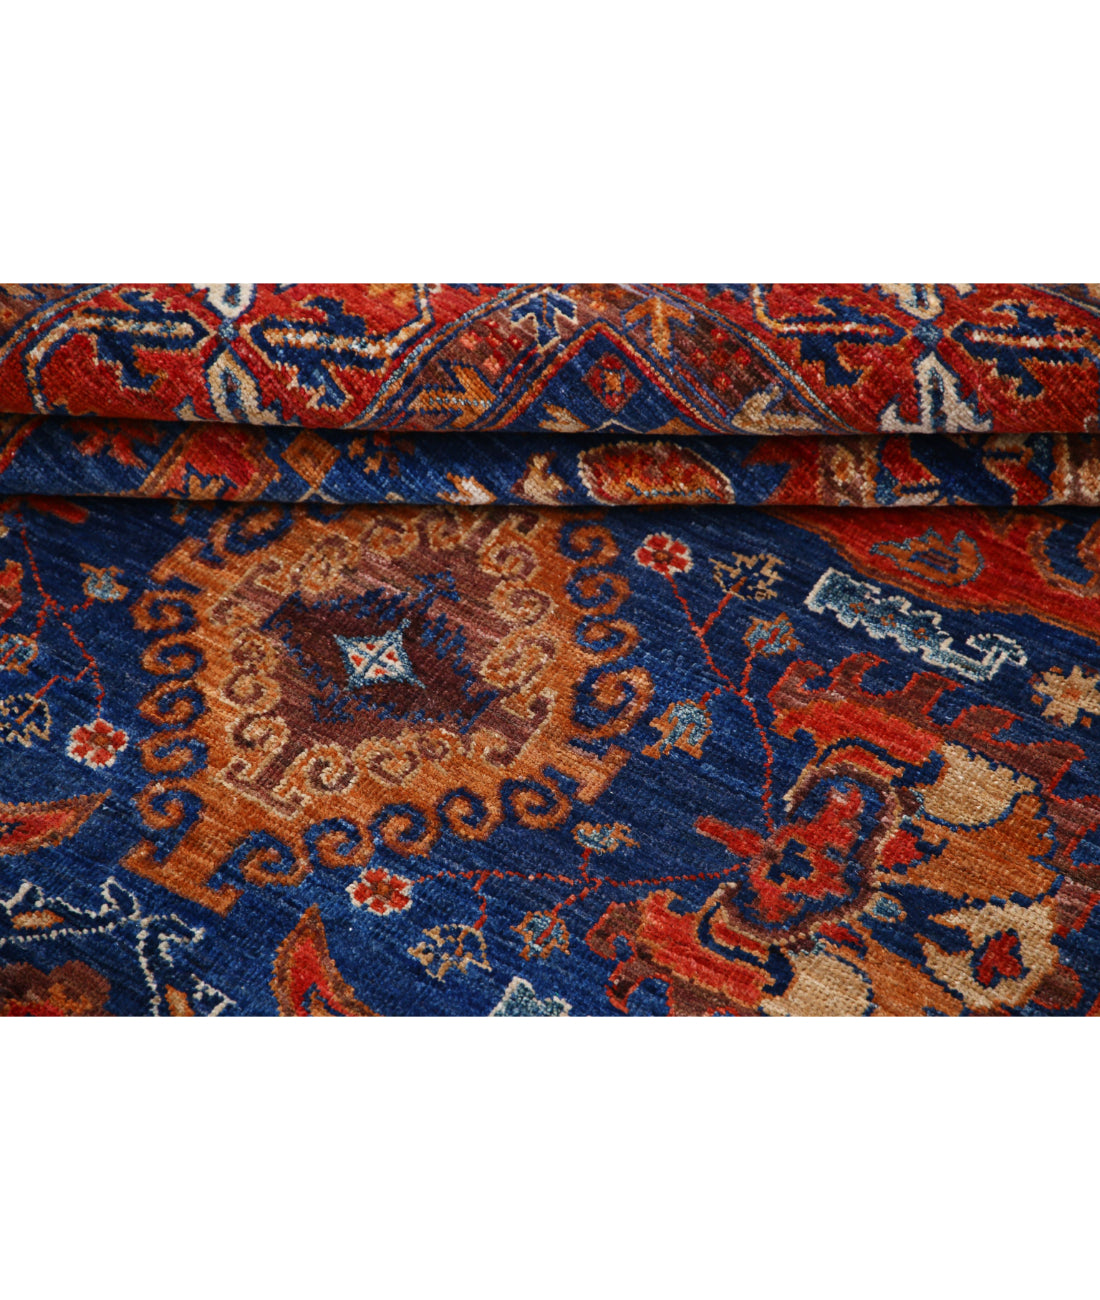 Hand Knotted Nomadic Caucasian Humna Wool Rug - 4'11'' x 6'9'' 4'11'' x 6'9'' (148 X 203) / Blue / Red